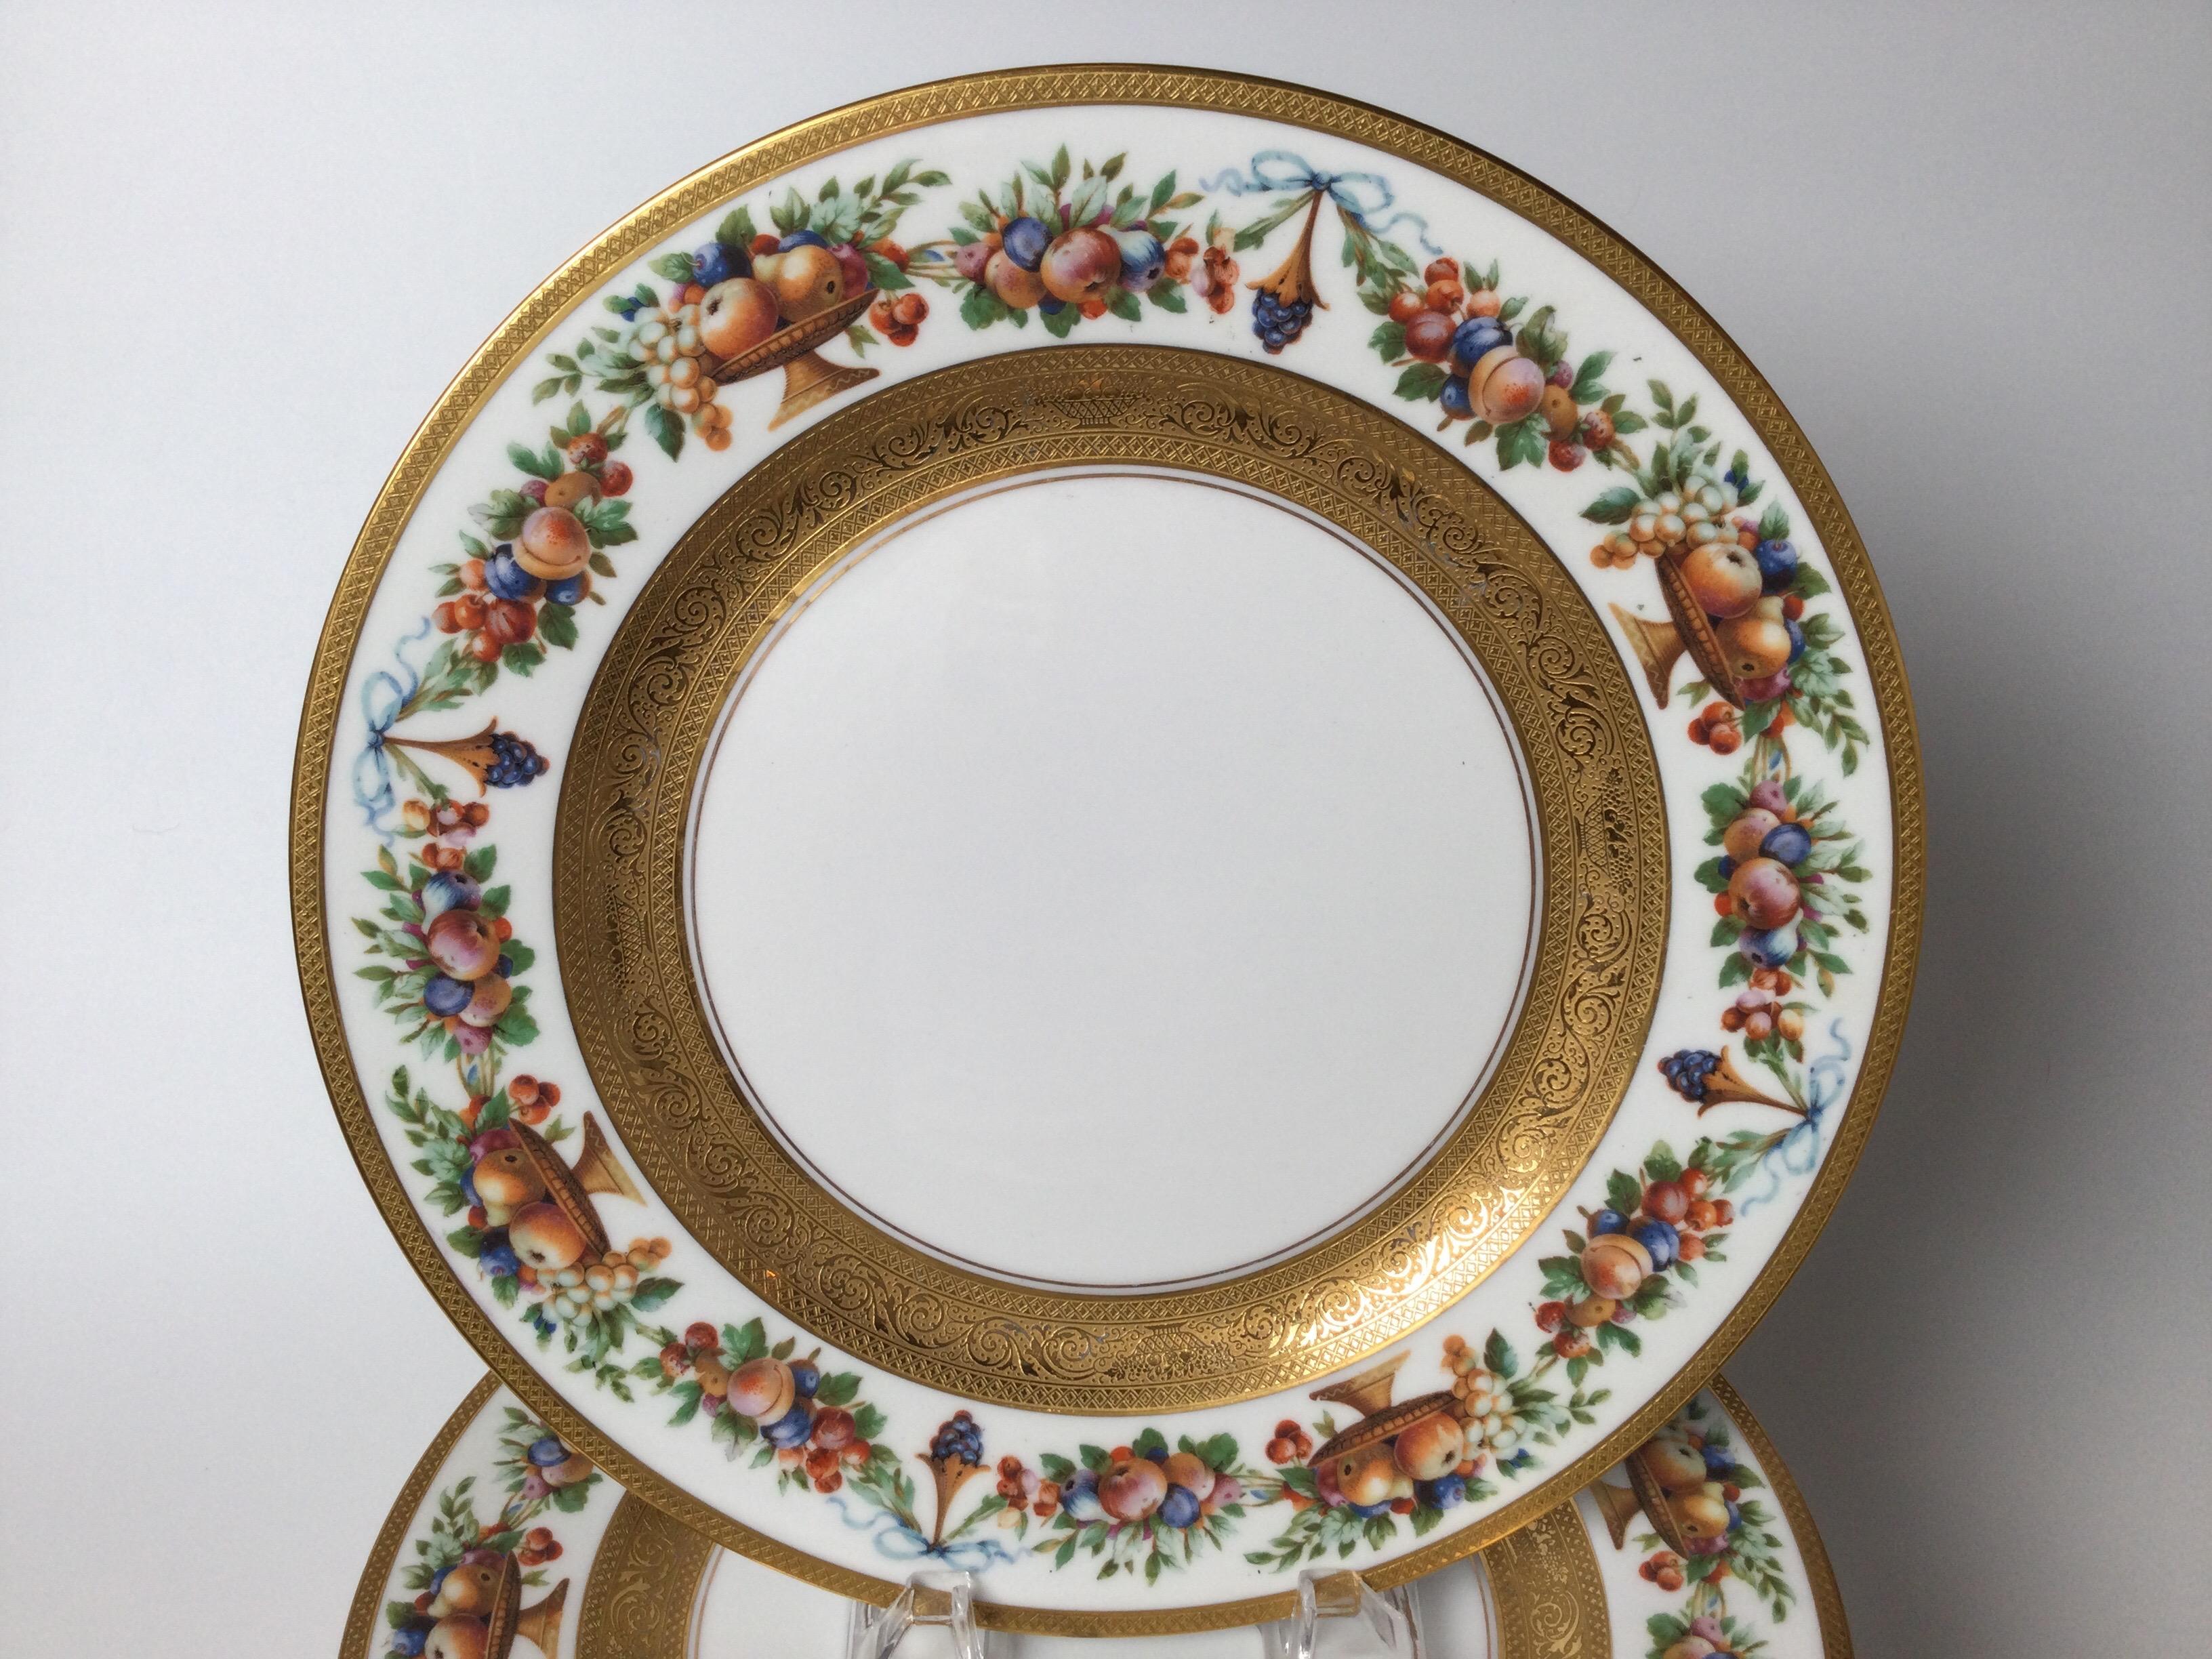 Set of 12 porcelain and gilt service plates. The decorative borders with swags and garlands of fruit with detailed gold bands on the edge and in the center.